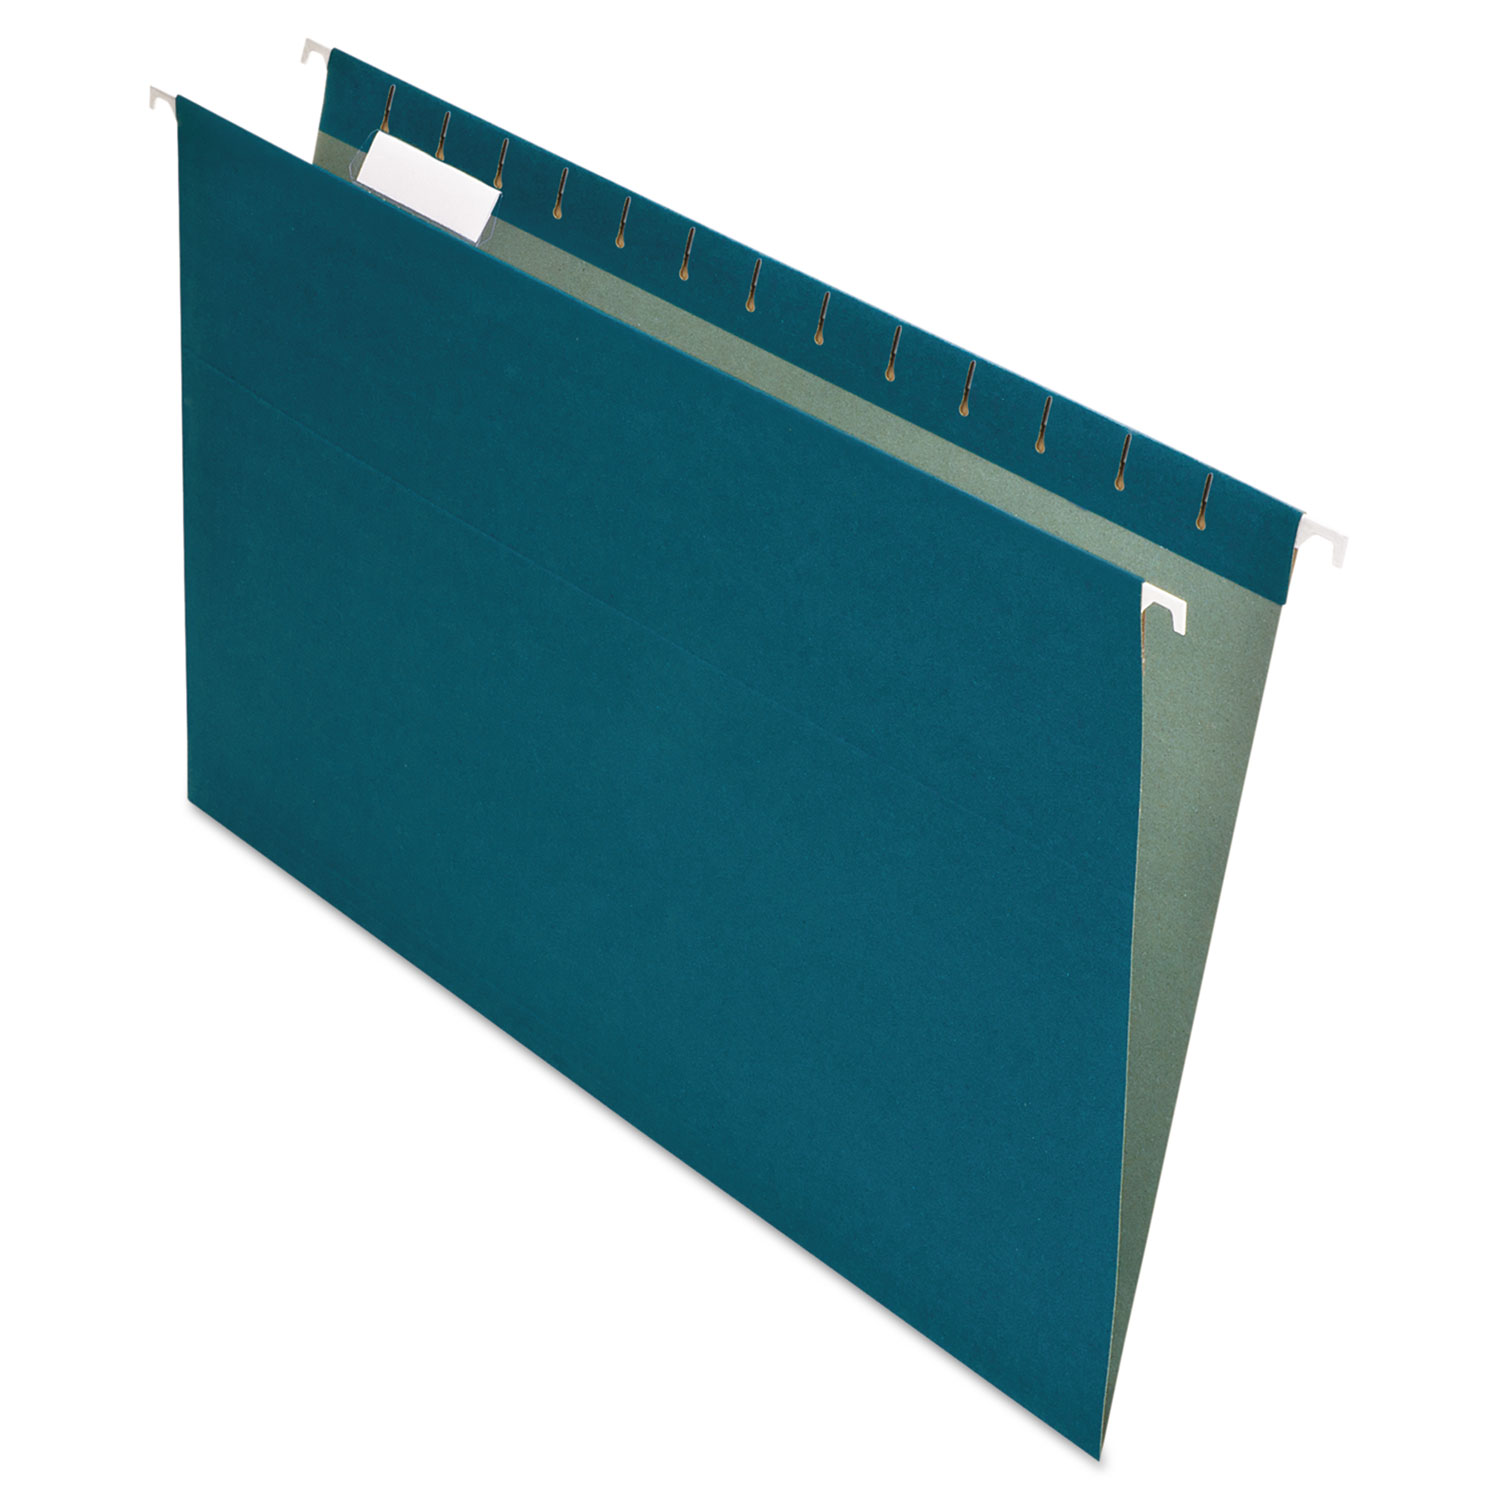 Earthwise by Pendaflex Recycled Hanging File Folder, 1/5 Cut, Lgl, Blue, 25/BX